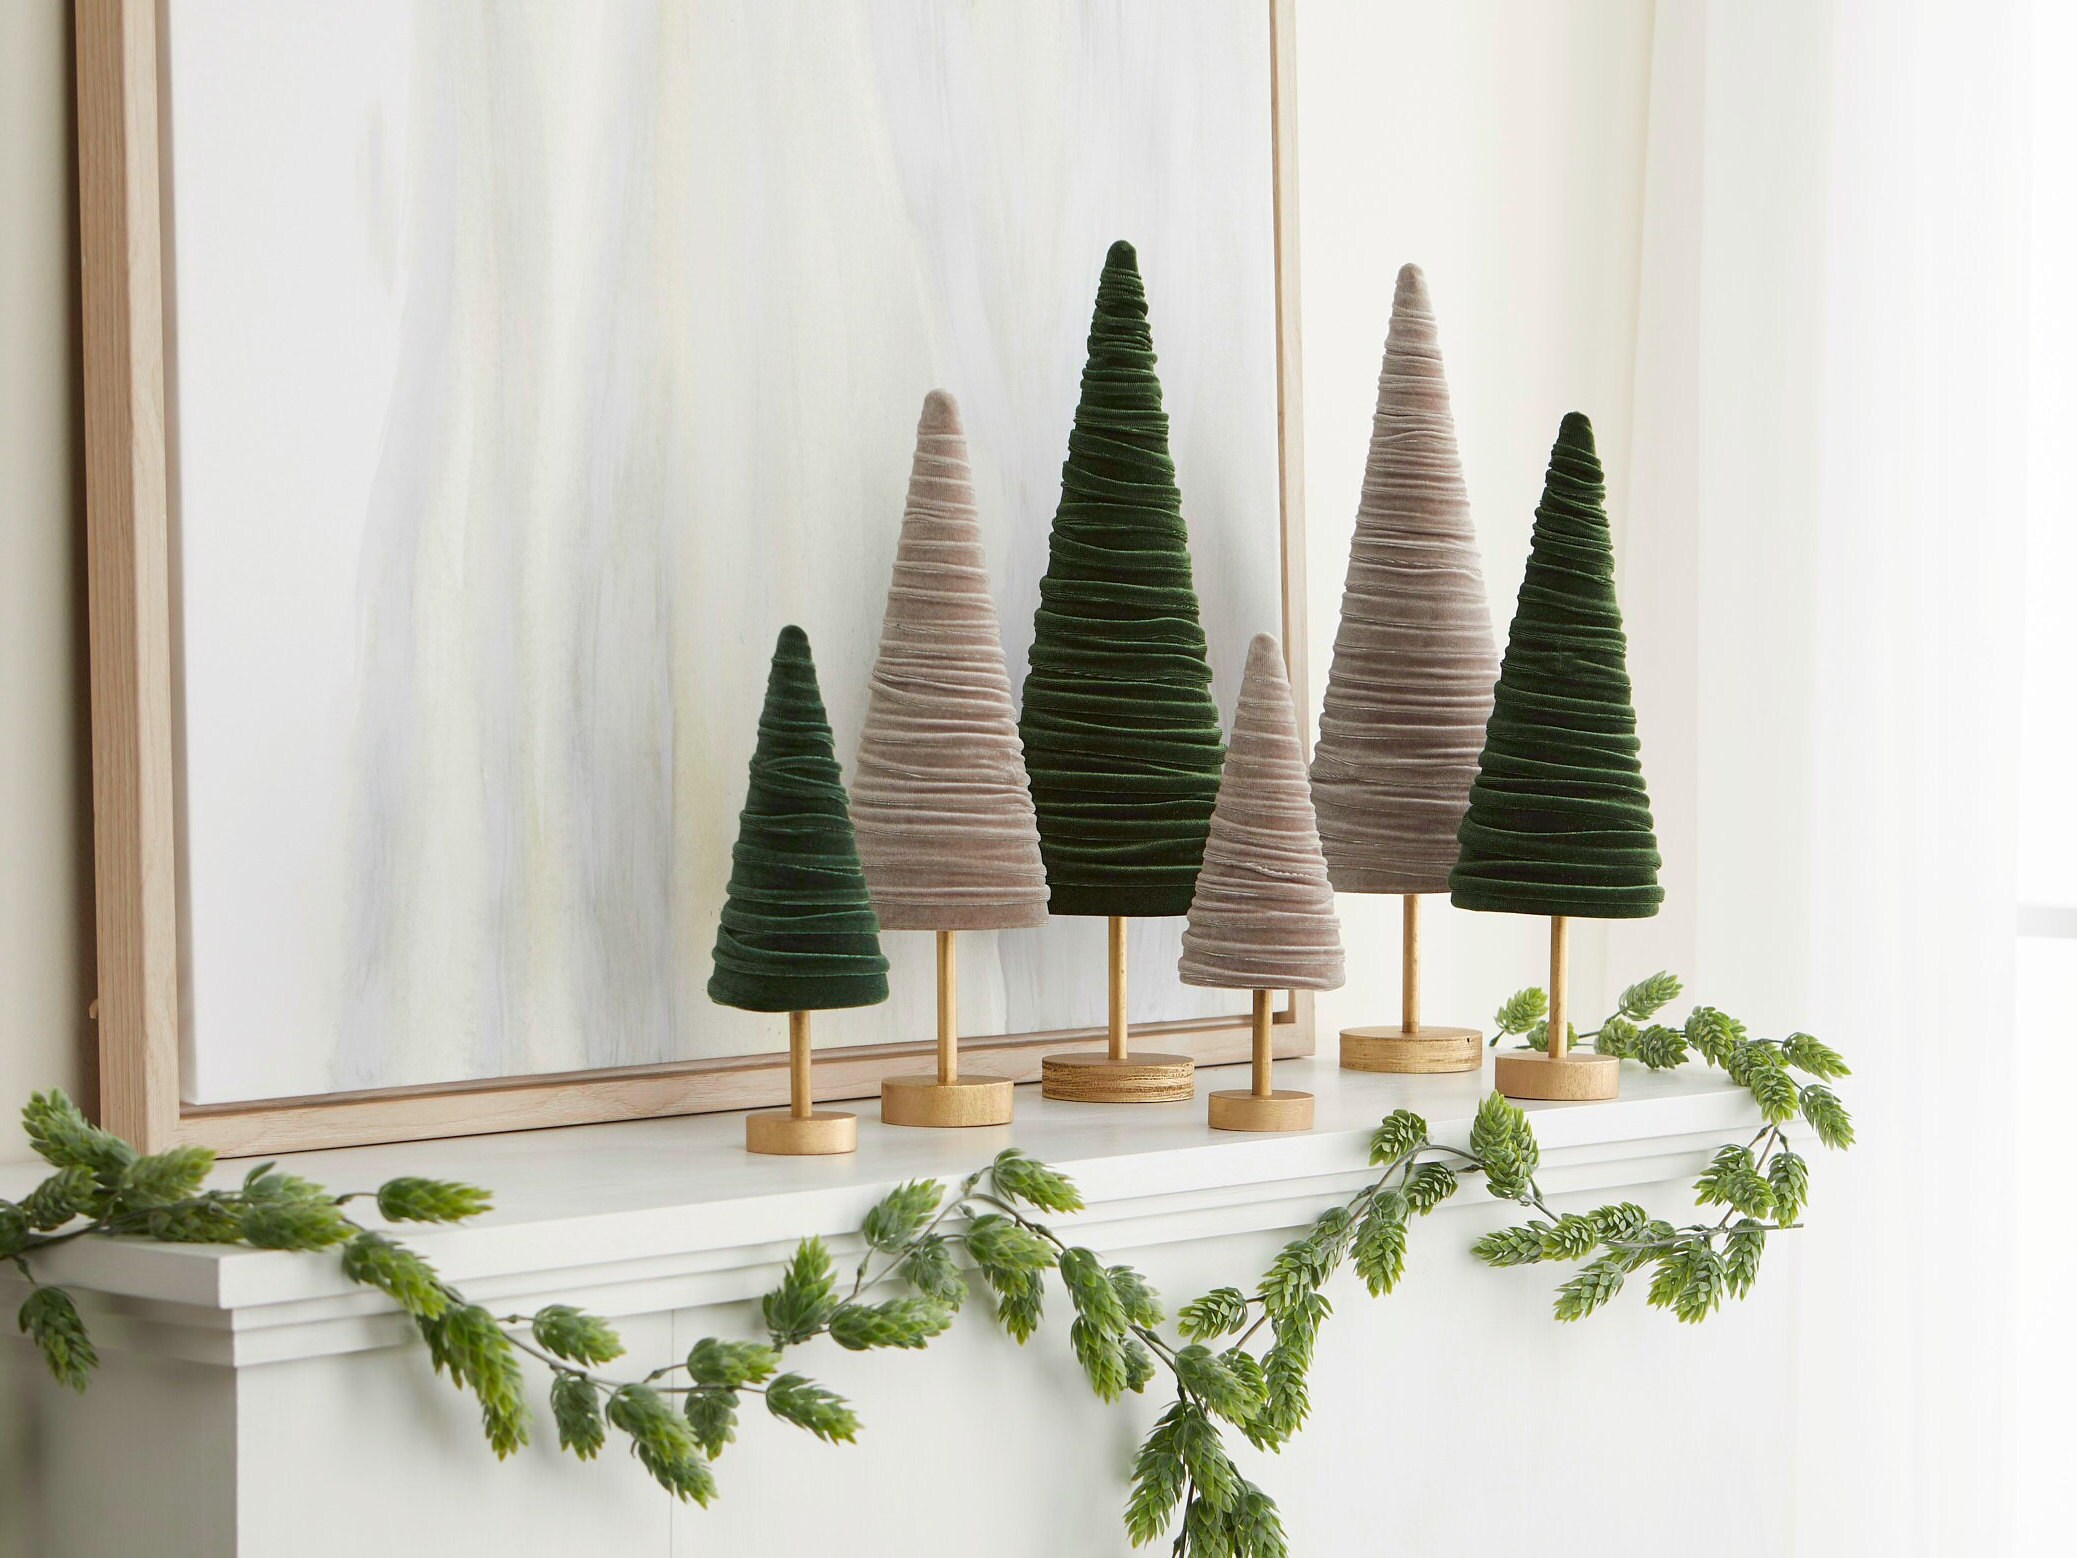  Christmas Pedestal Velvet Trees Set of 3 Modern Winter Tree  Decorations 3 Sizes Christmas Velvet Decorations Rustic Xmas Table Top  Centerpiece Decor for Home Entryway (Red, Green, White) : Home & Kitchen